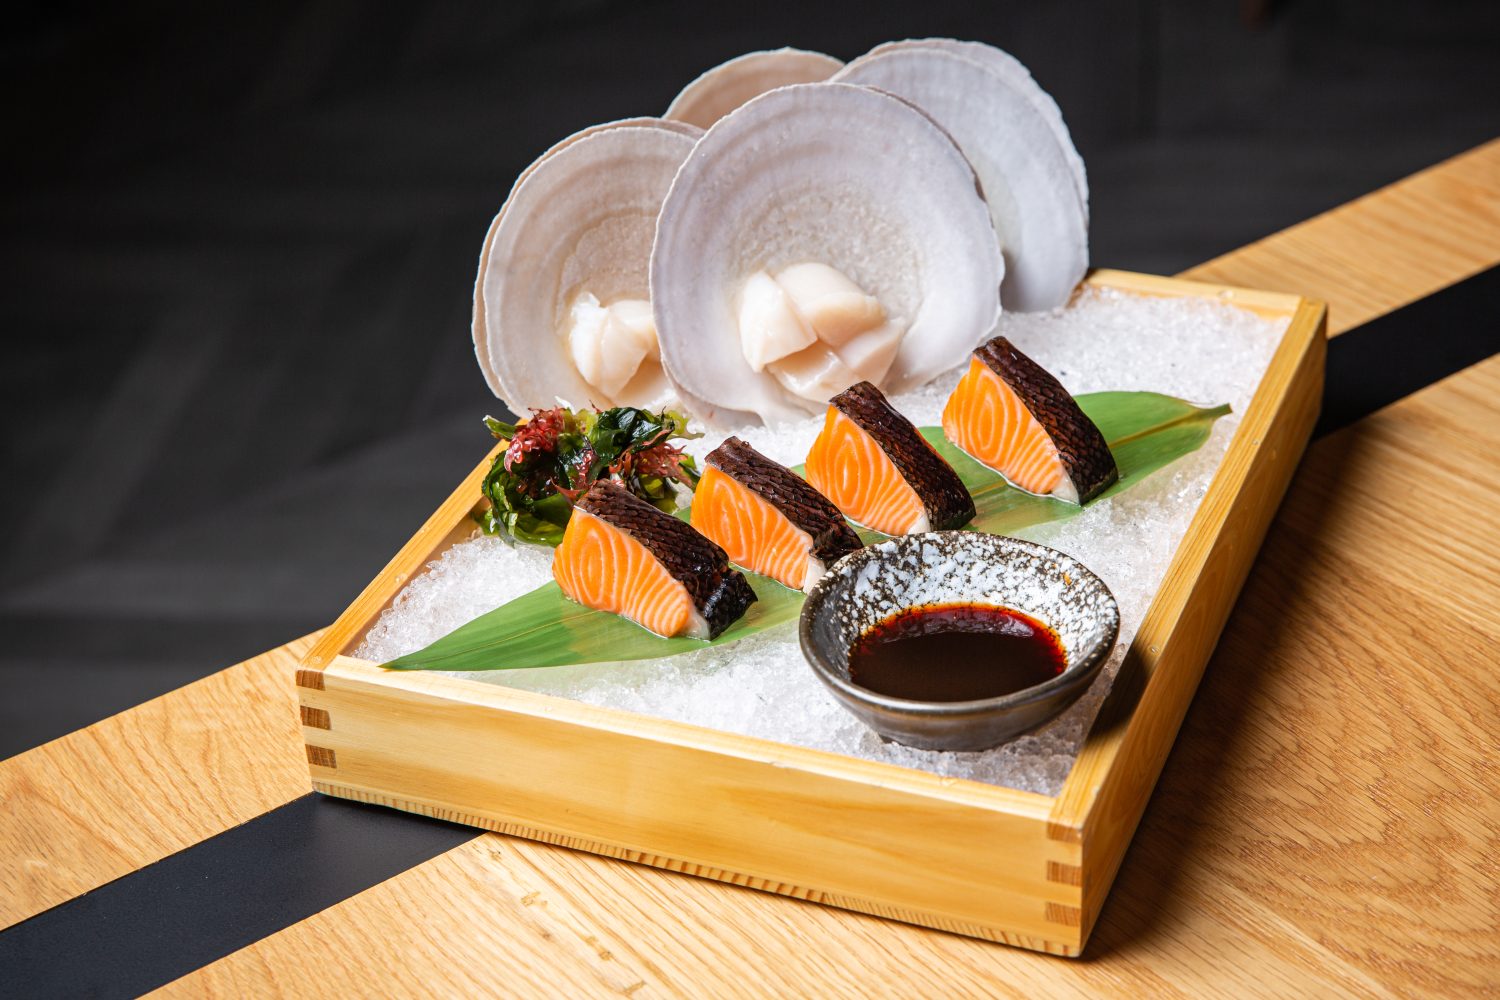 4 pieces of sushi on a leaf, 4 scallops, green garnish, sauce on the side, wooden box